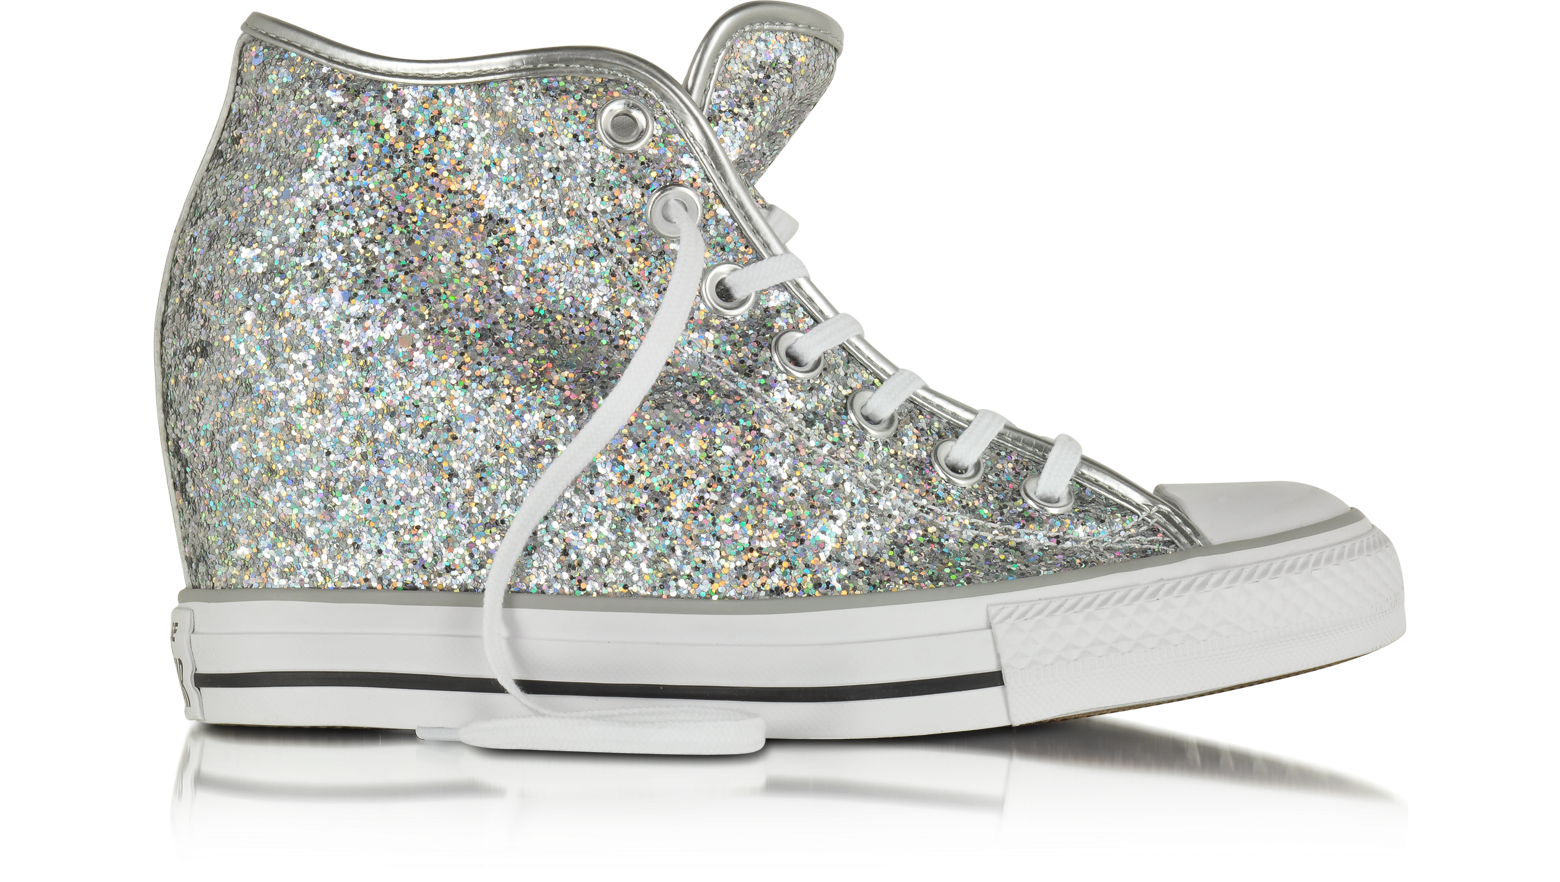 Converse Limited Edition All Star Mid Lux Glitter Wedge Sneaker 6.5 WOMENS  US | 4.5 UK | 37.5 EU at FORZIERI